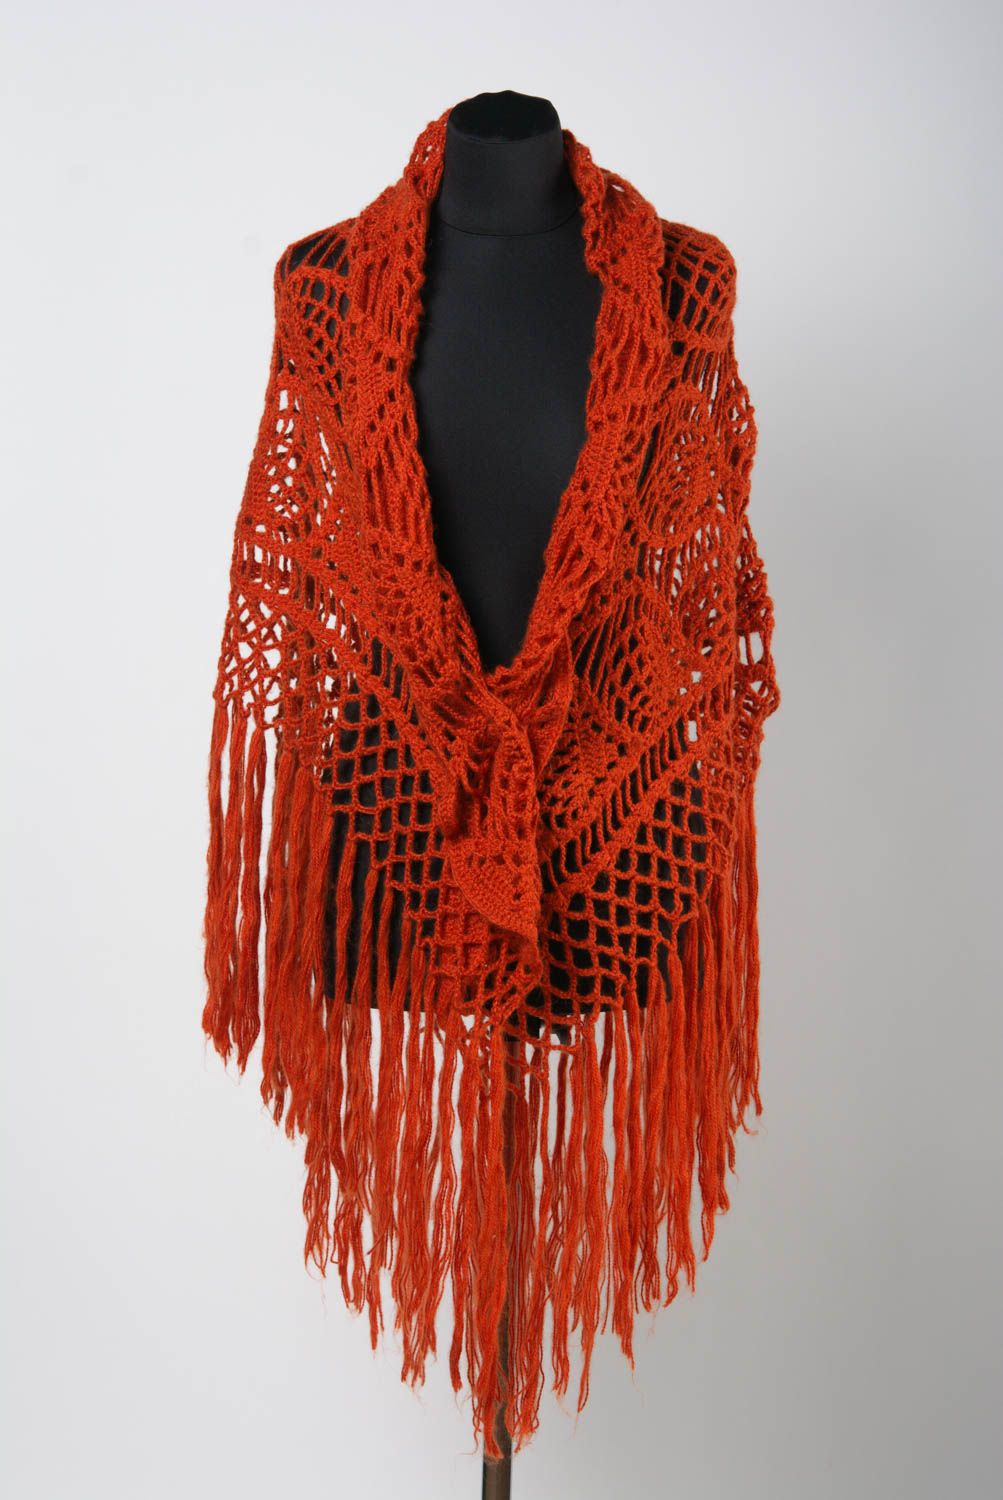 Handmade warm lace women's shawl knitted of wool of bright orange color photo 2